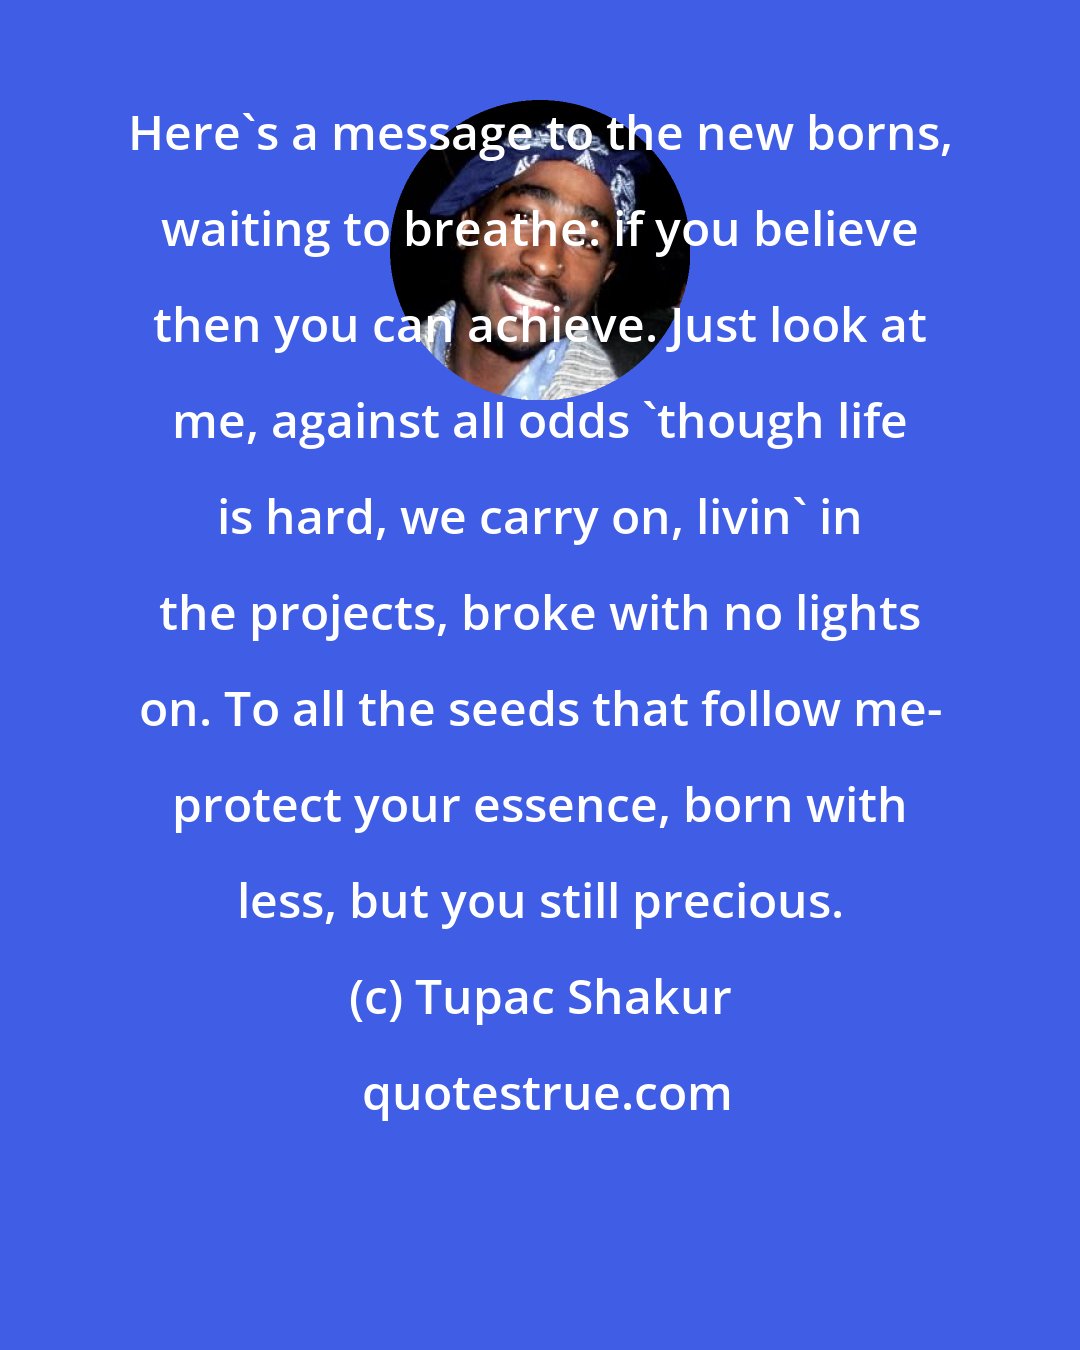 Tupac Shakur: Here's a message to the new borns, waiting to breathe: if you believe then you can achieve. Just look at me, against all odds 'though life is hard, we carry on, livin' in the projects, broke with no lights on. To all the seeds that follow me- protect your essence, born with less, but you still precious.